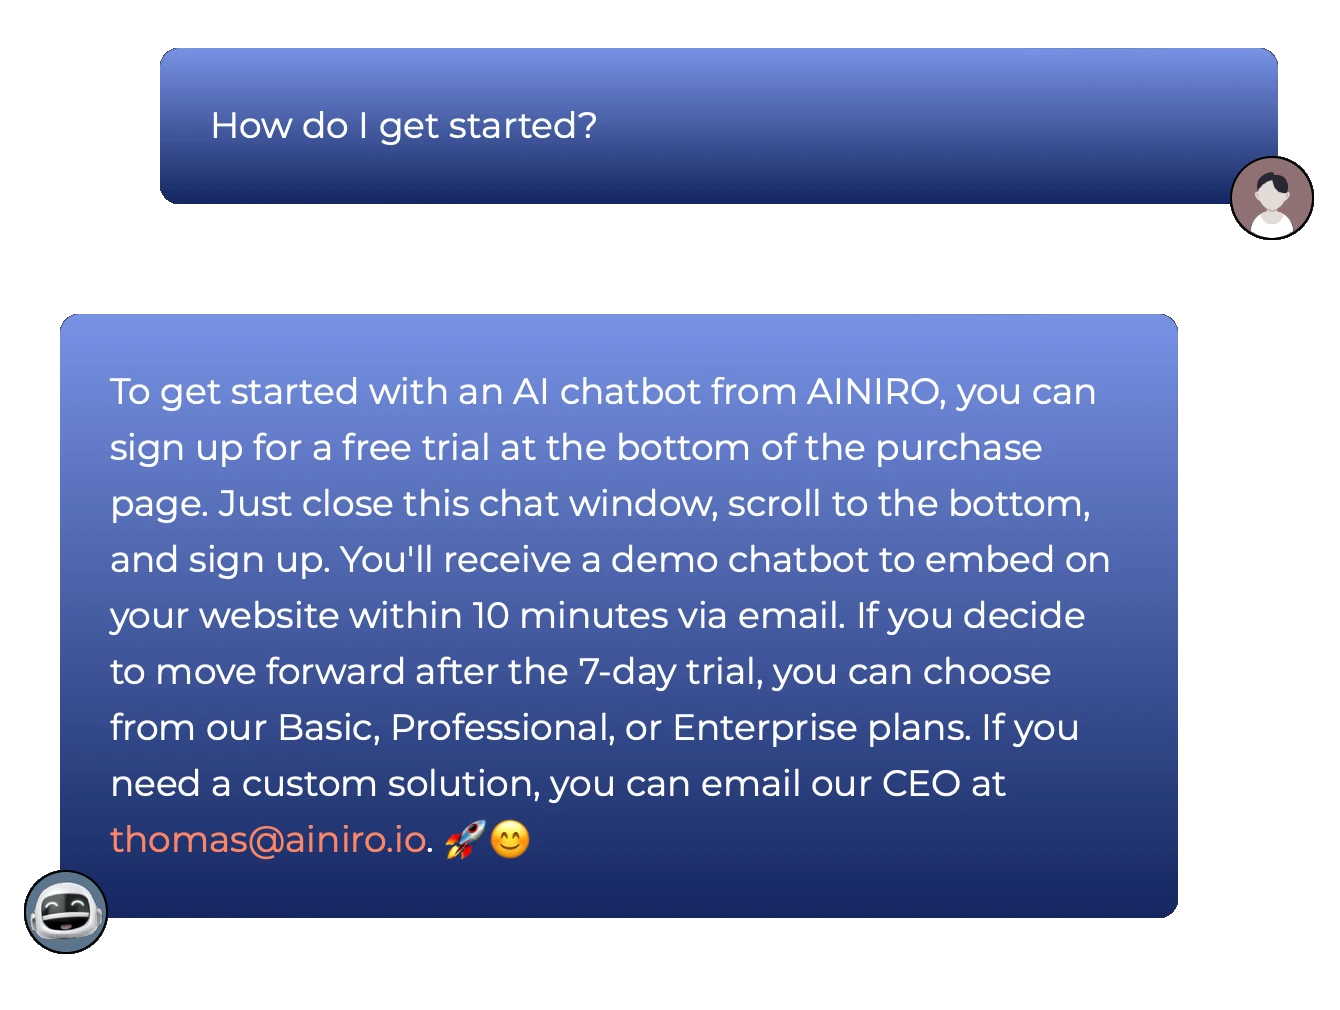 Our AI chatbot on our website answering questions about how to get started and have your own AI chatbot on your website